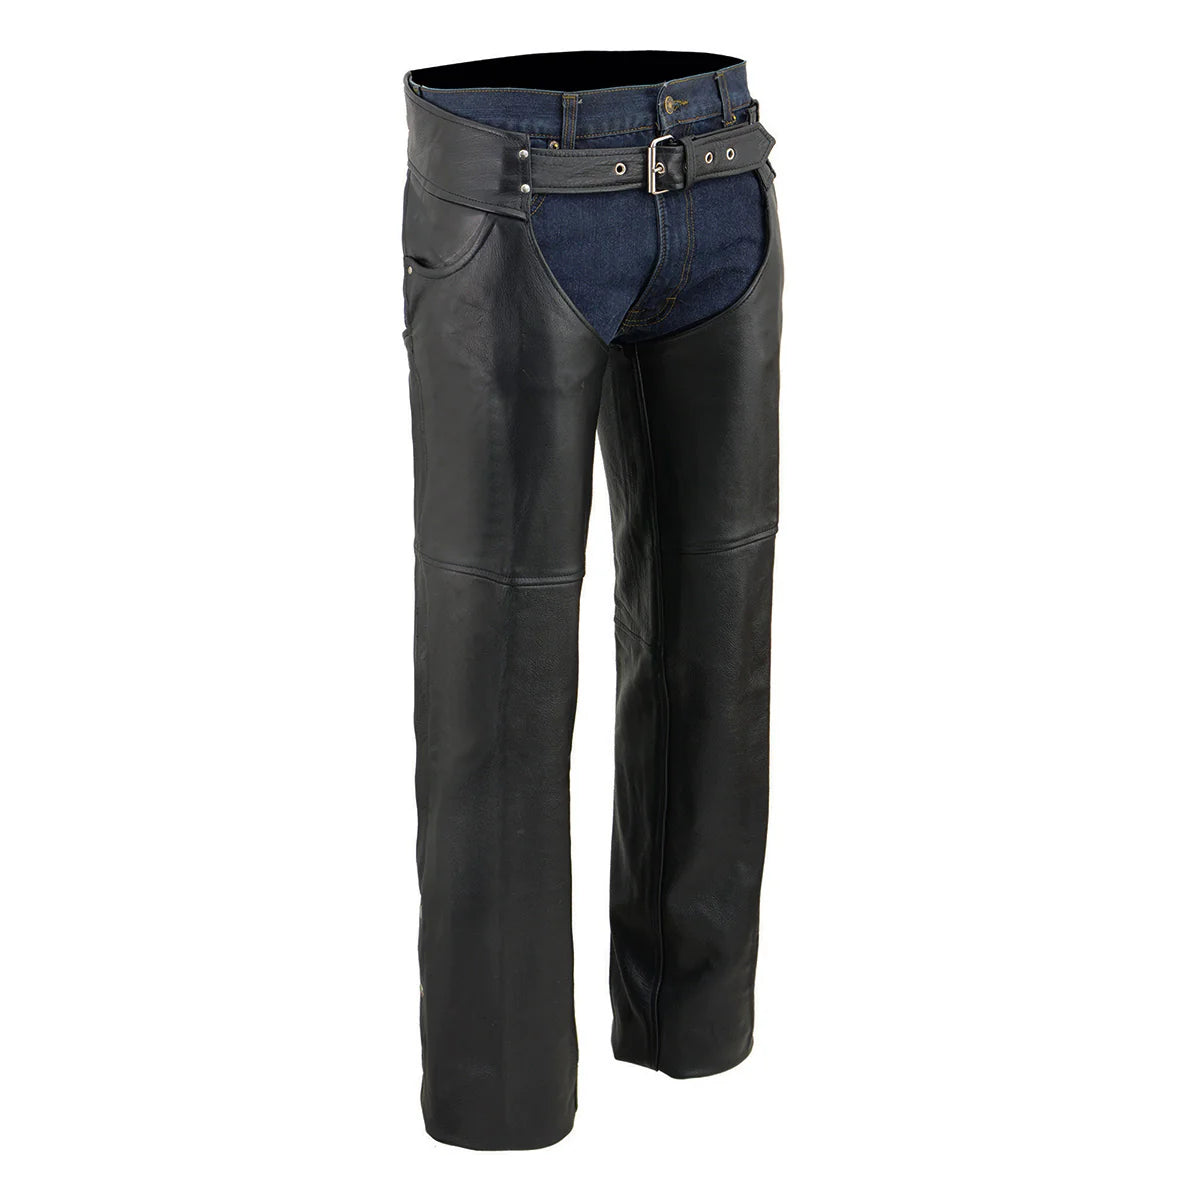 Men's Classic Black Tall Sizes Leather Chaps with Jean Pockets